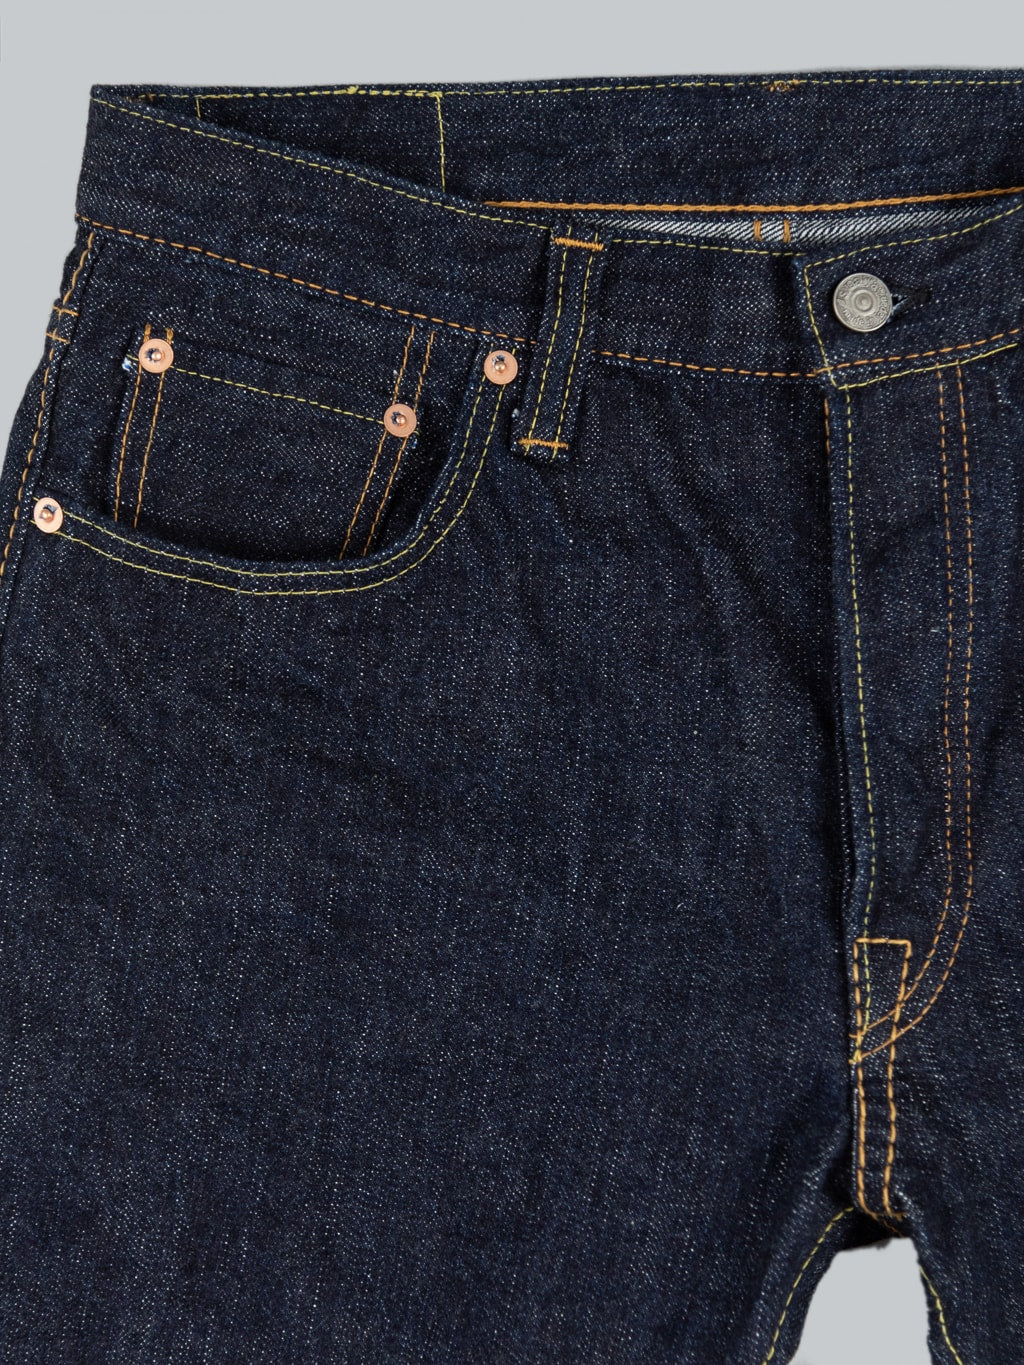 Pure Blue Japan Relaxed Tapered denim jeans front pocket 